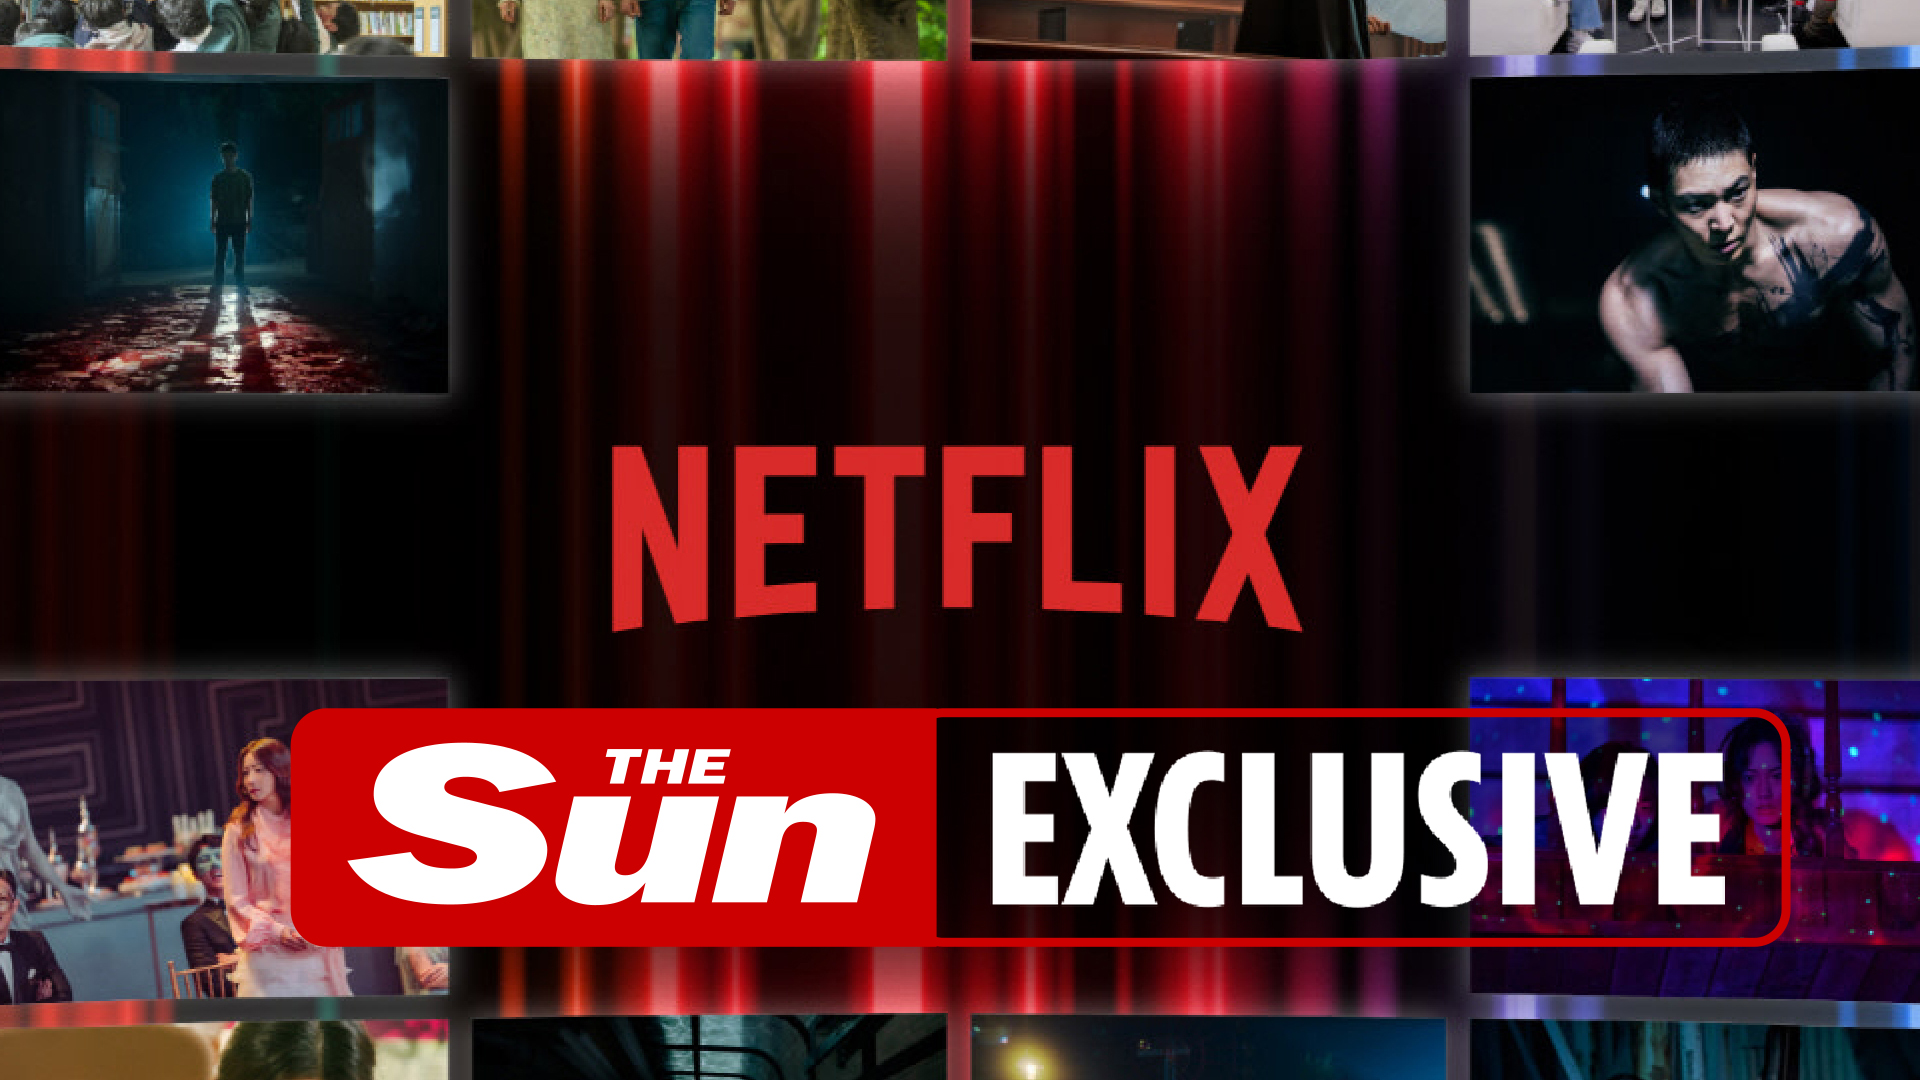 Cheap new Netflix plan 'to cost just £5.49 a month', insiders reveal